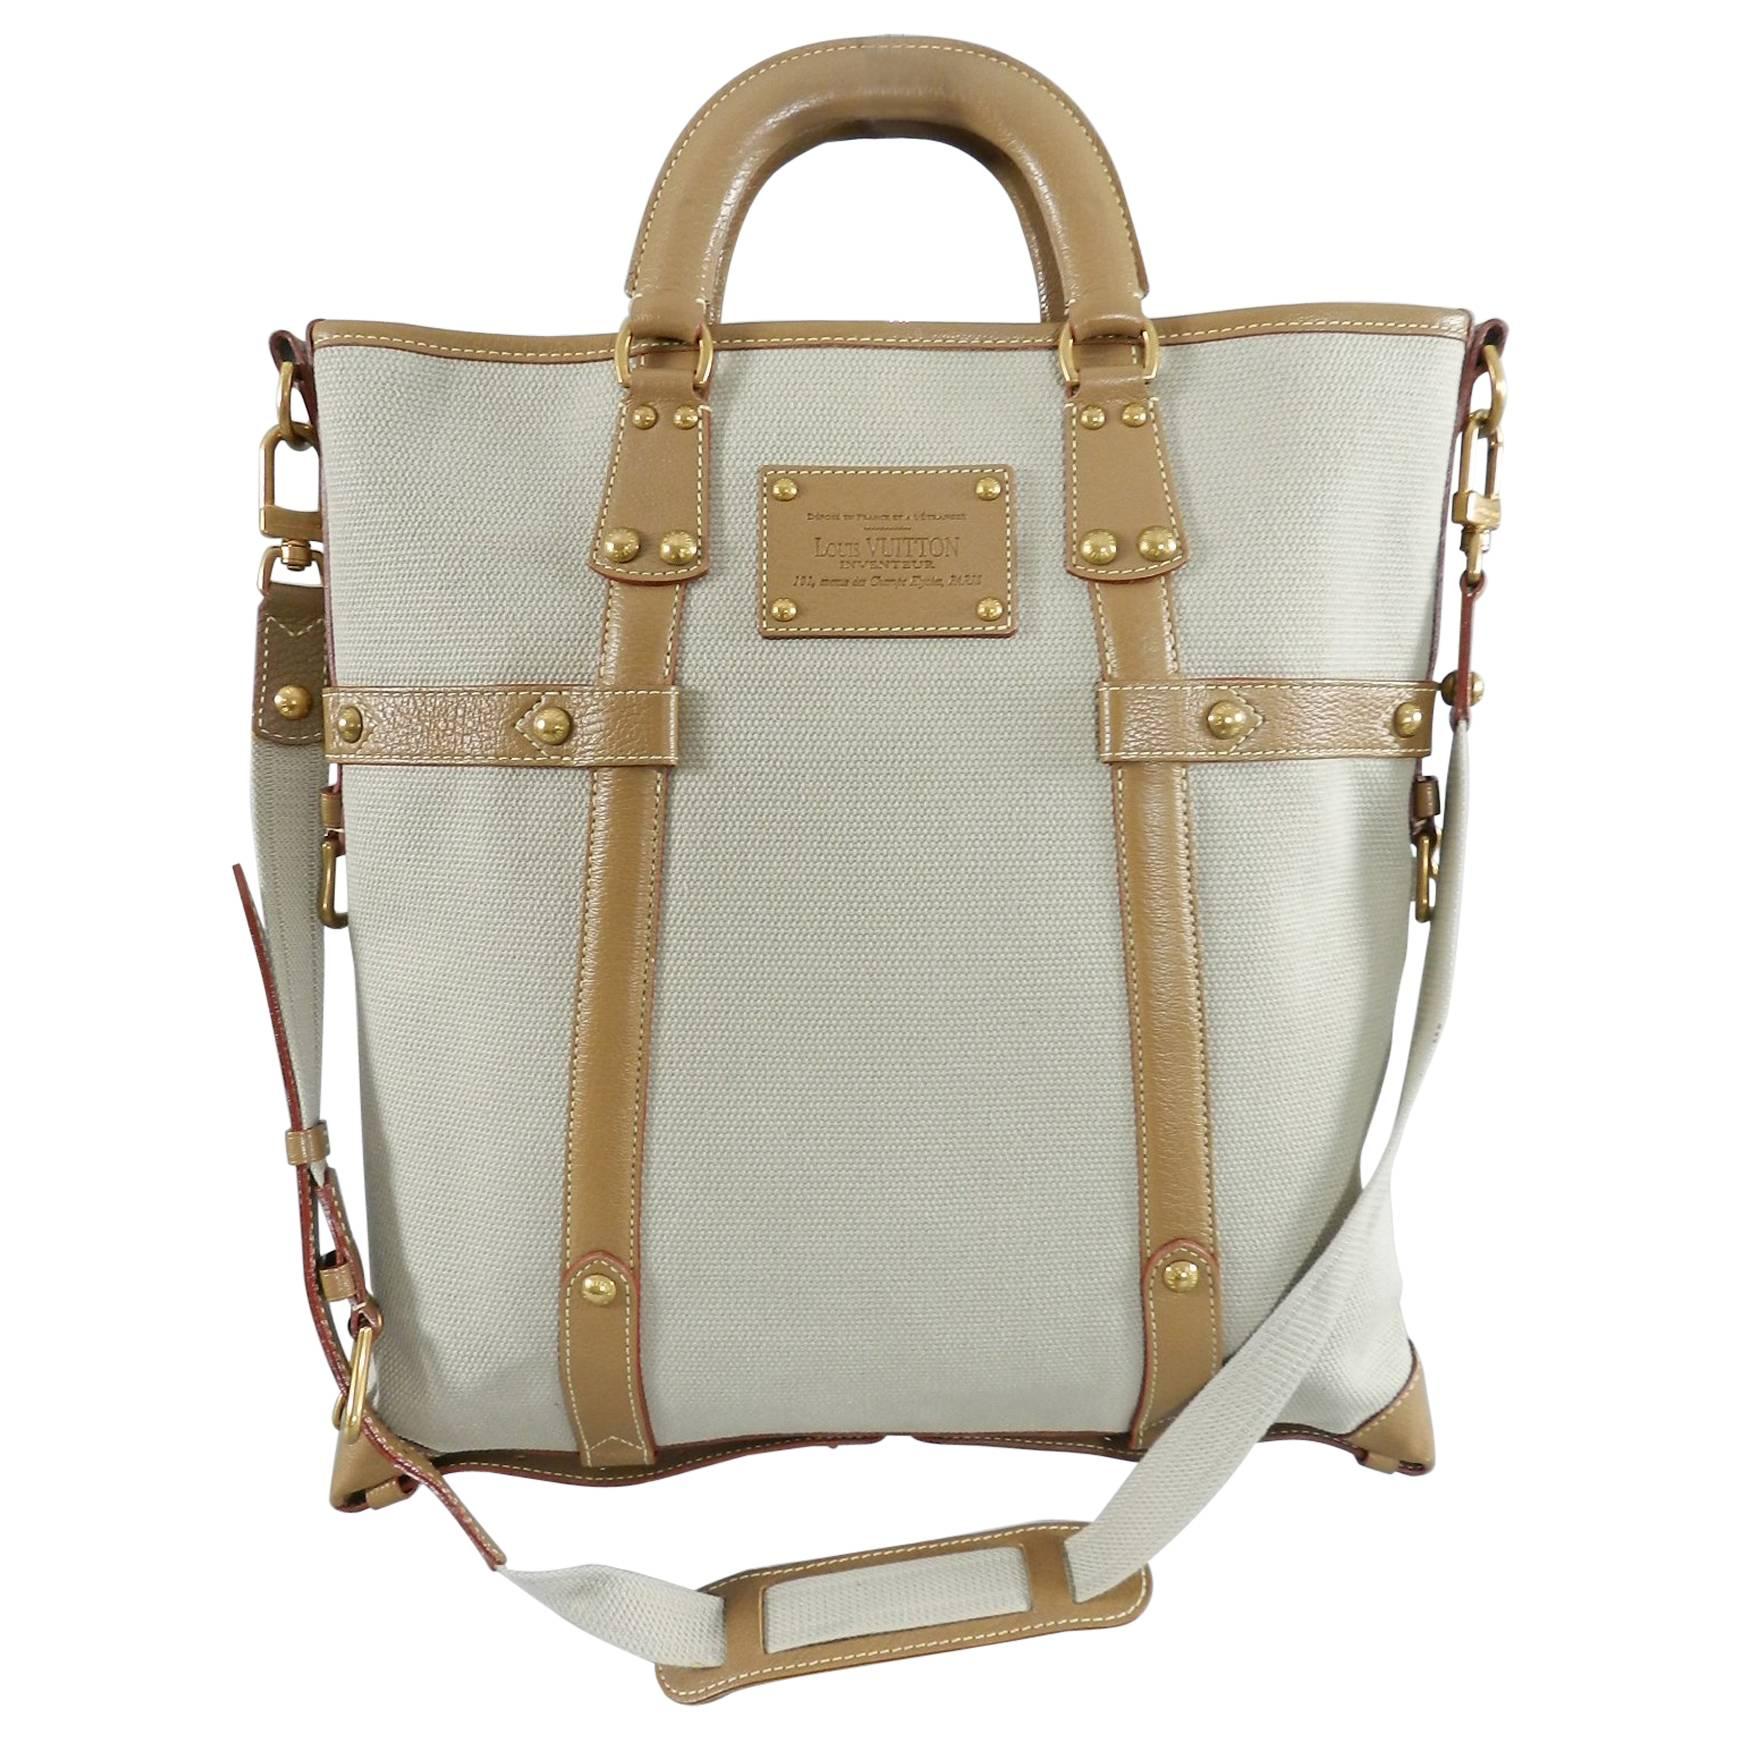 Louis Vuitton Trianon Poids Plume GM Canvas and Leather Tote Bag